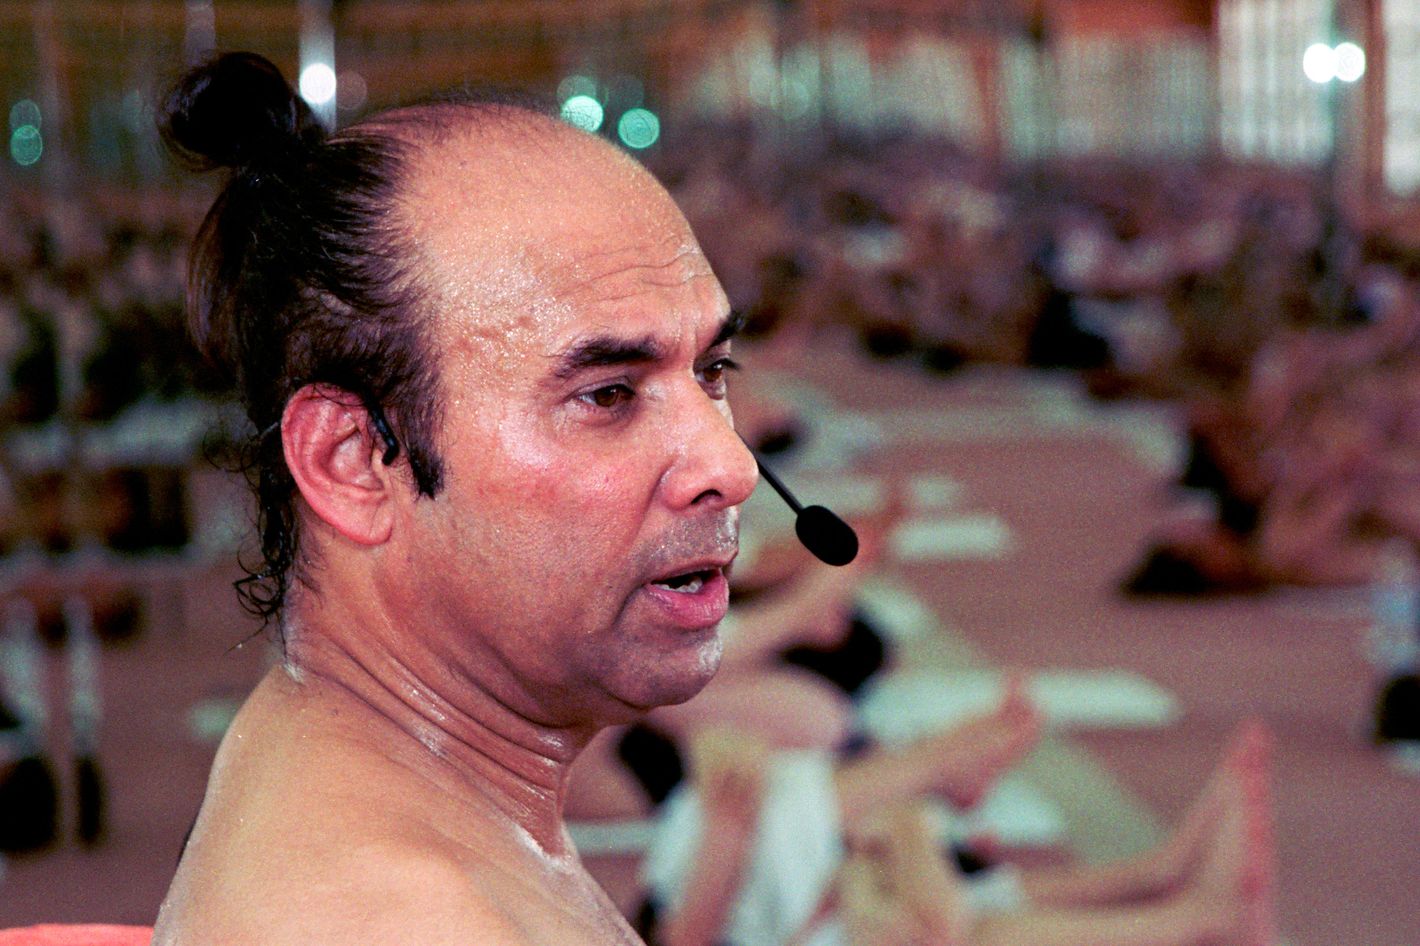 Bikram yoga founder Bikram Choudhury trapped in Mexico after passport  seized; fleet of CA cars to be auctioned - ABC7 Los Angeles